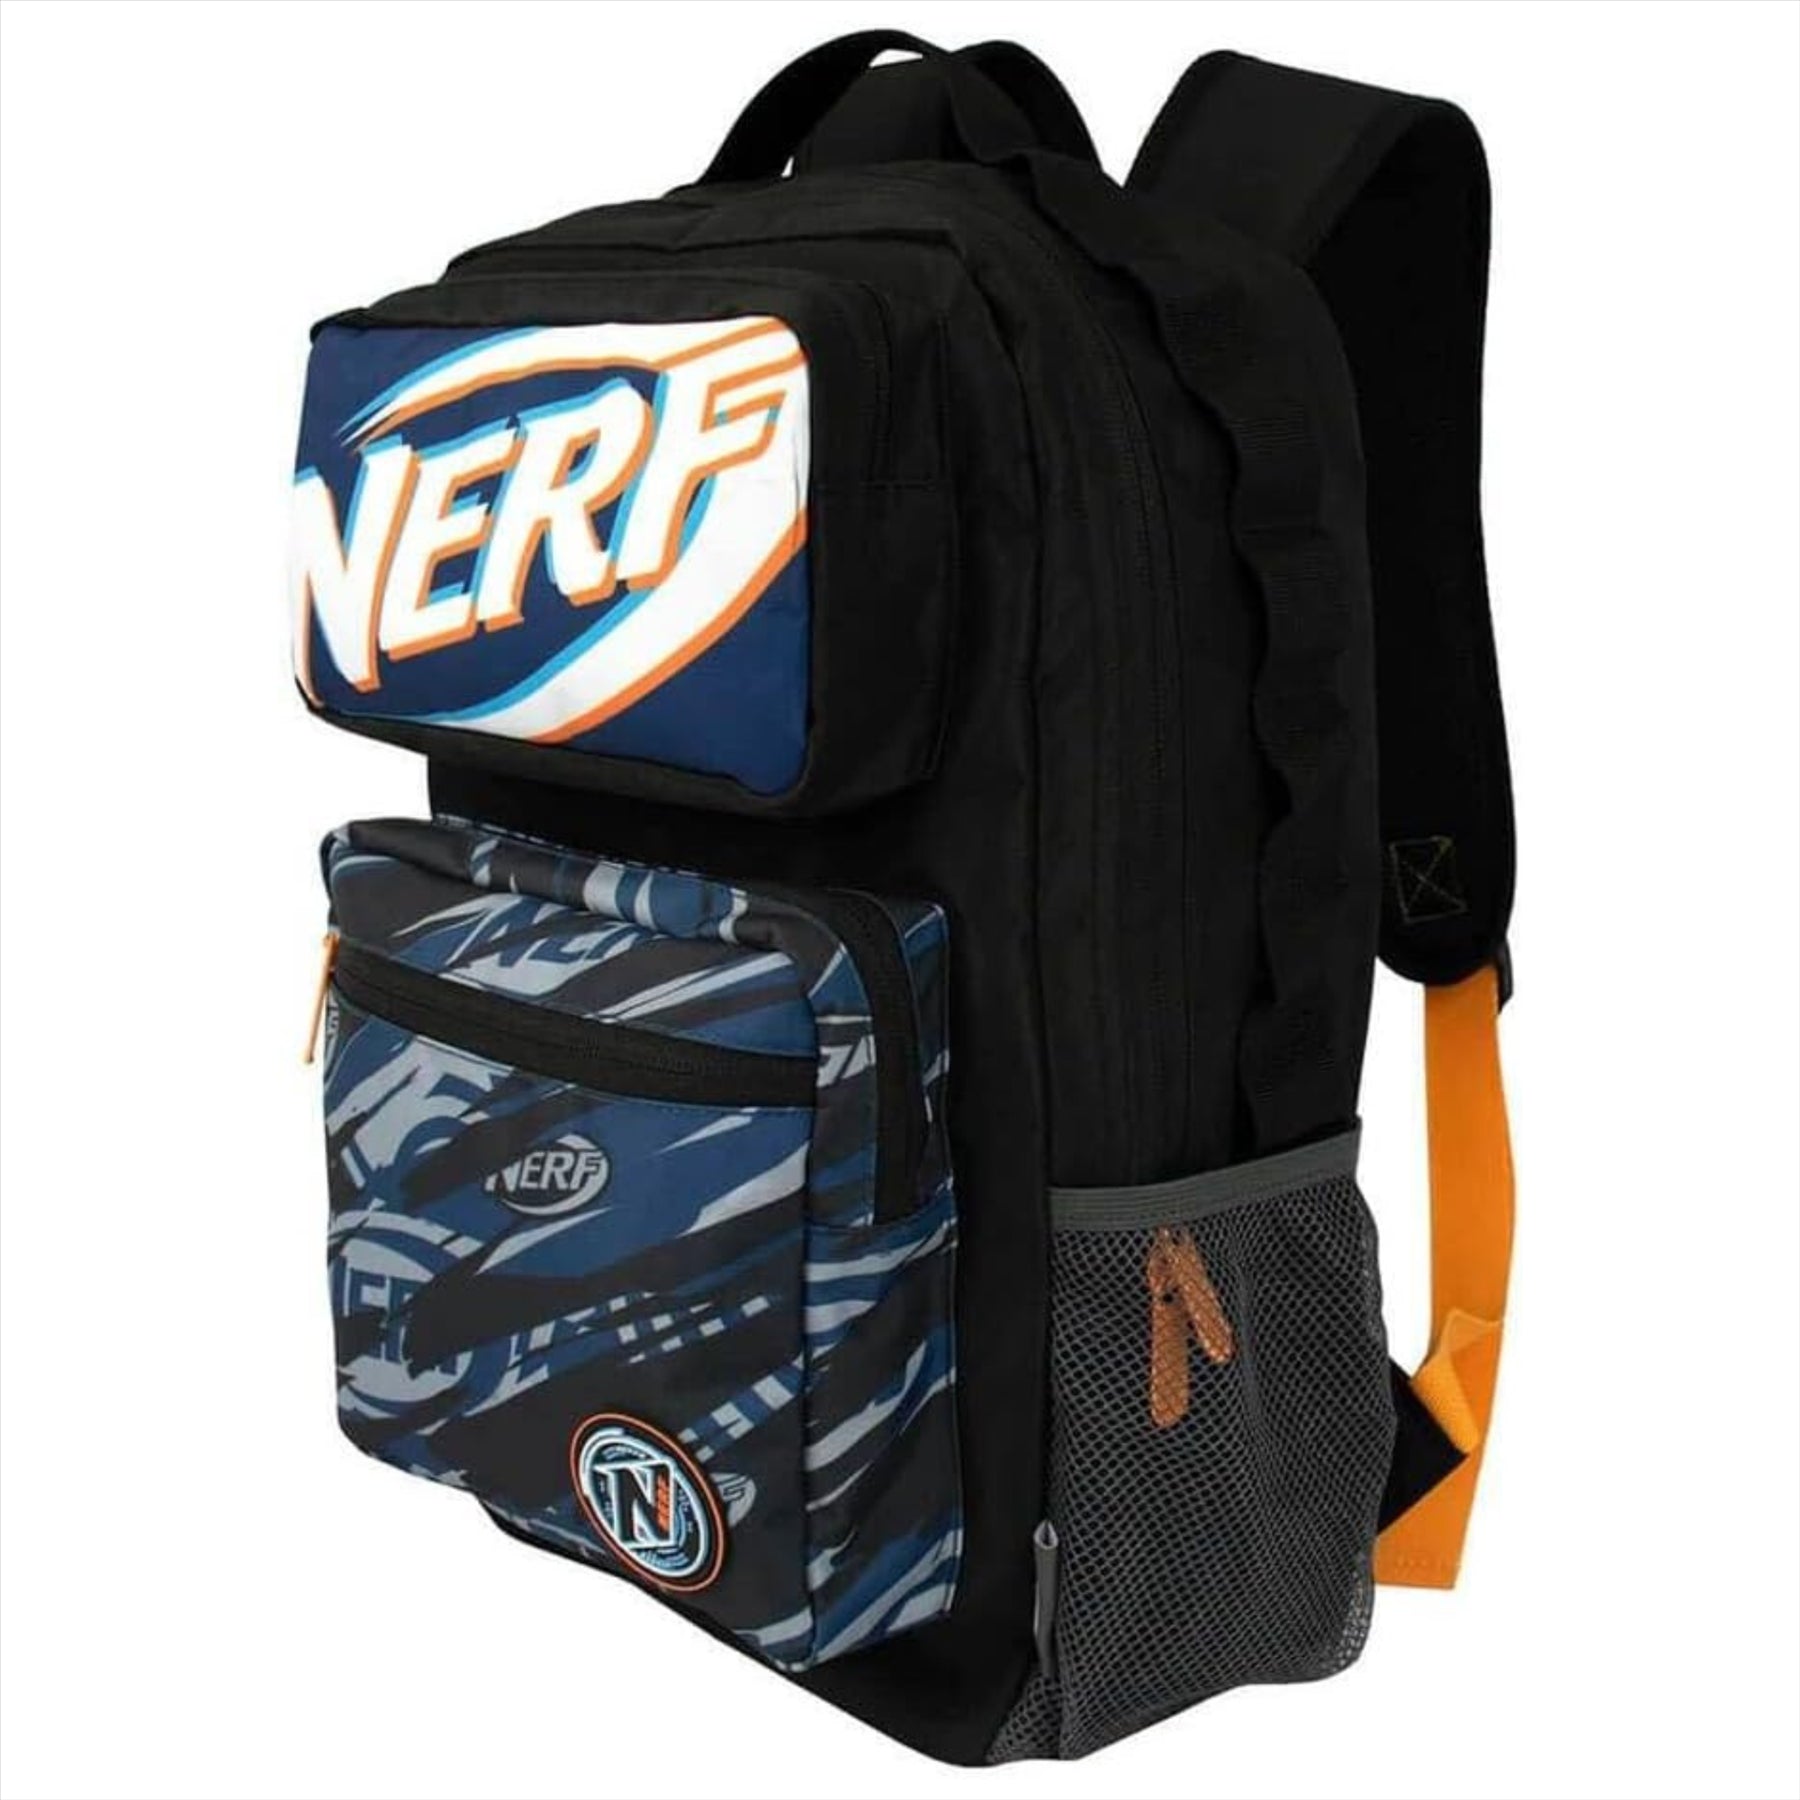 Nerf Tech Junior Backpack - Premium Tactical Rucksack with Camo Pattern